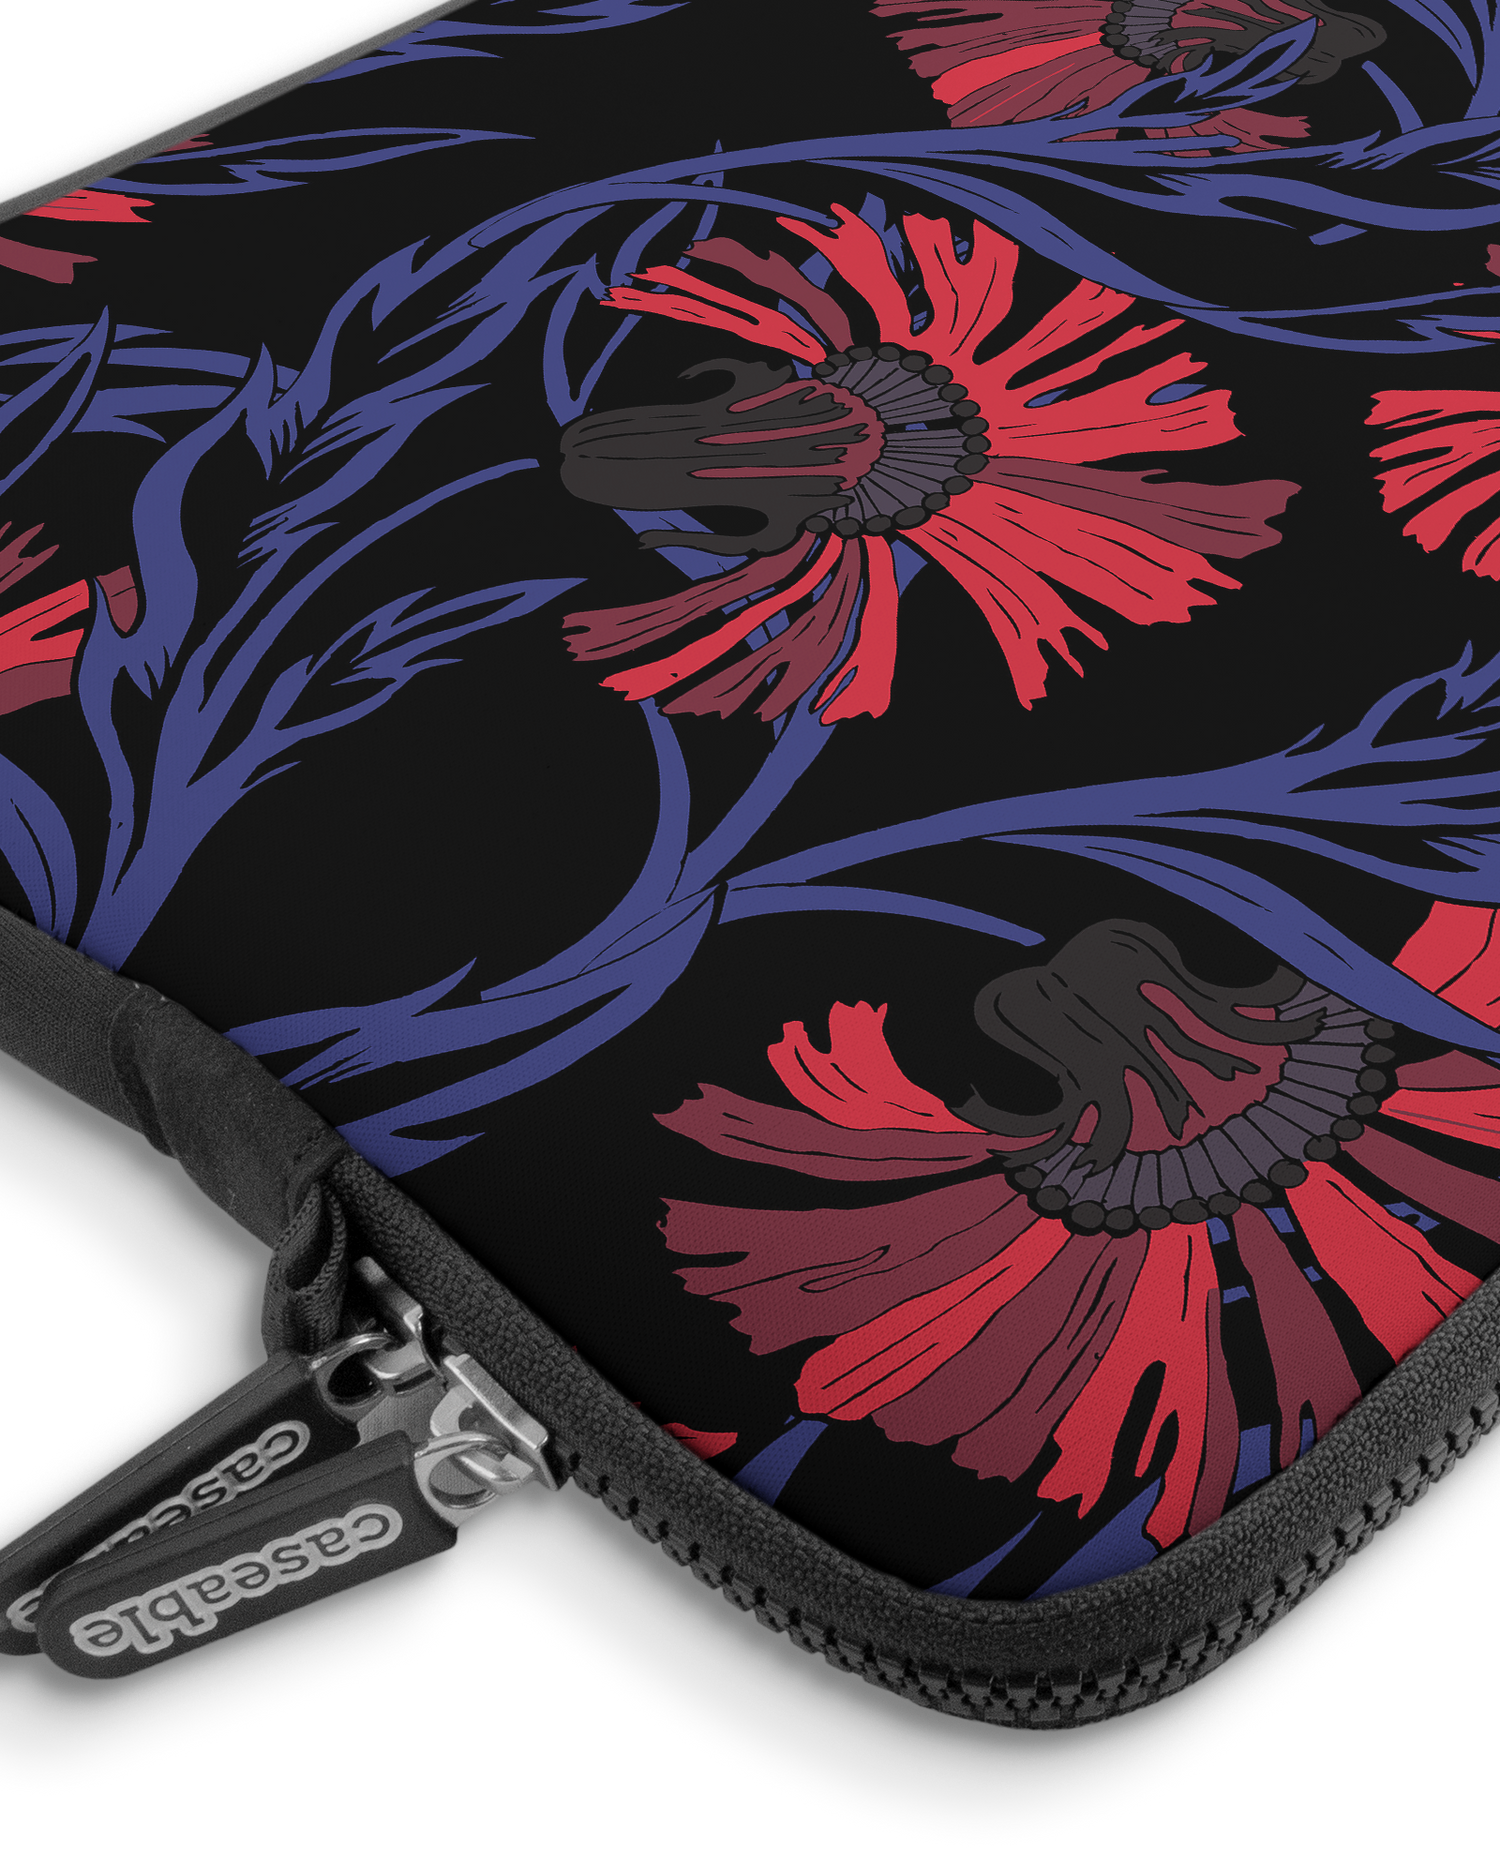 Midnight Floral Premium Laptop Bag 13-14 inch with device inside